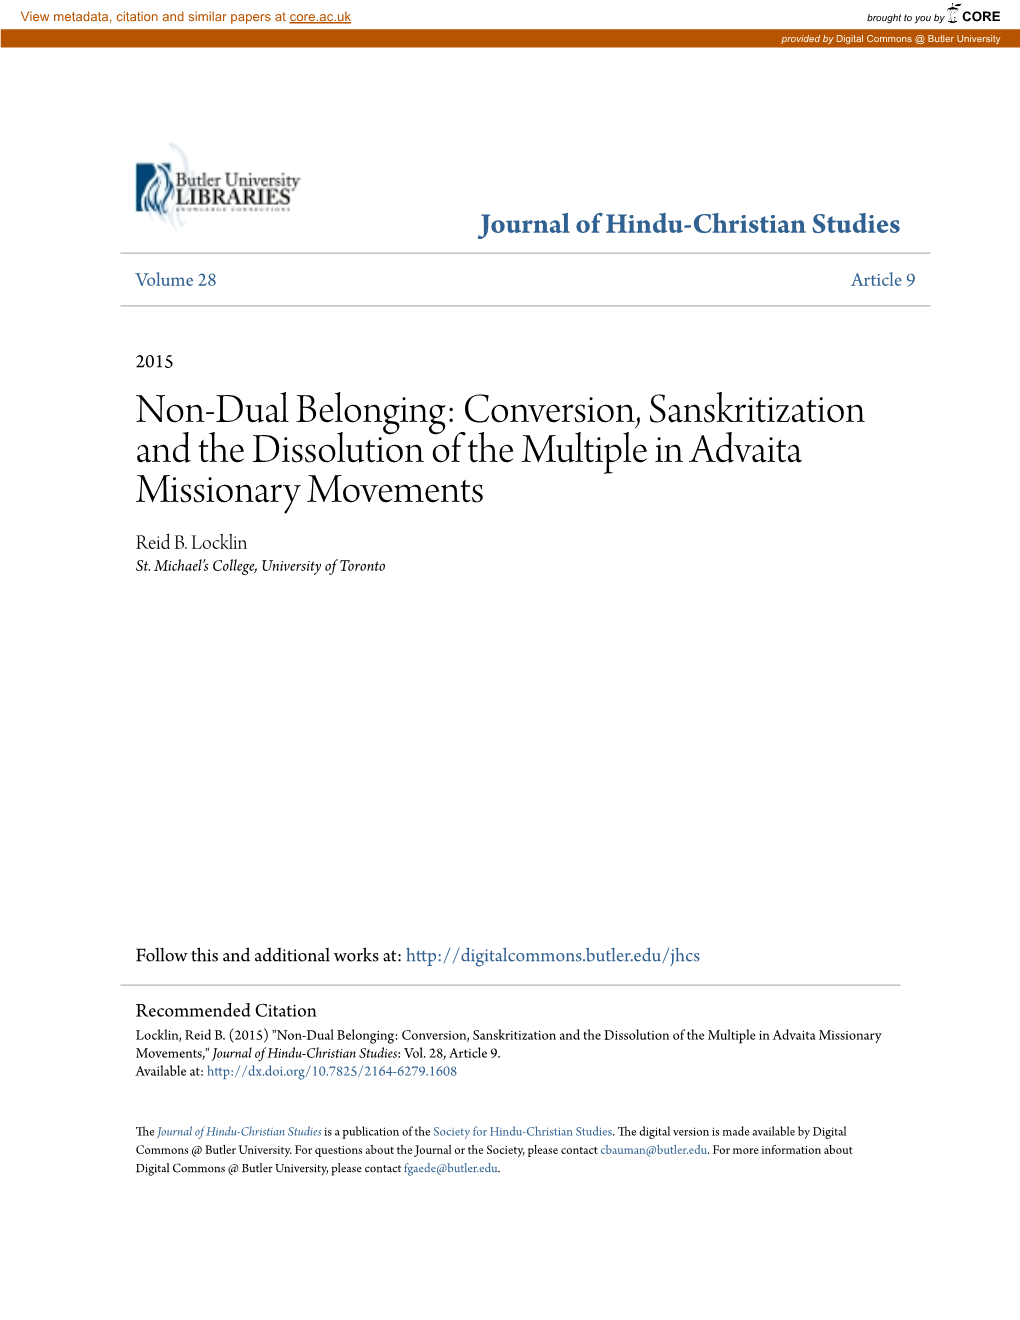 Conversion, Sanskritization and the Dissolution of the Multiple in Advaita Missionary Movements Reid B